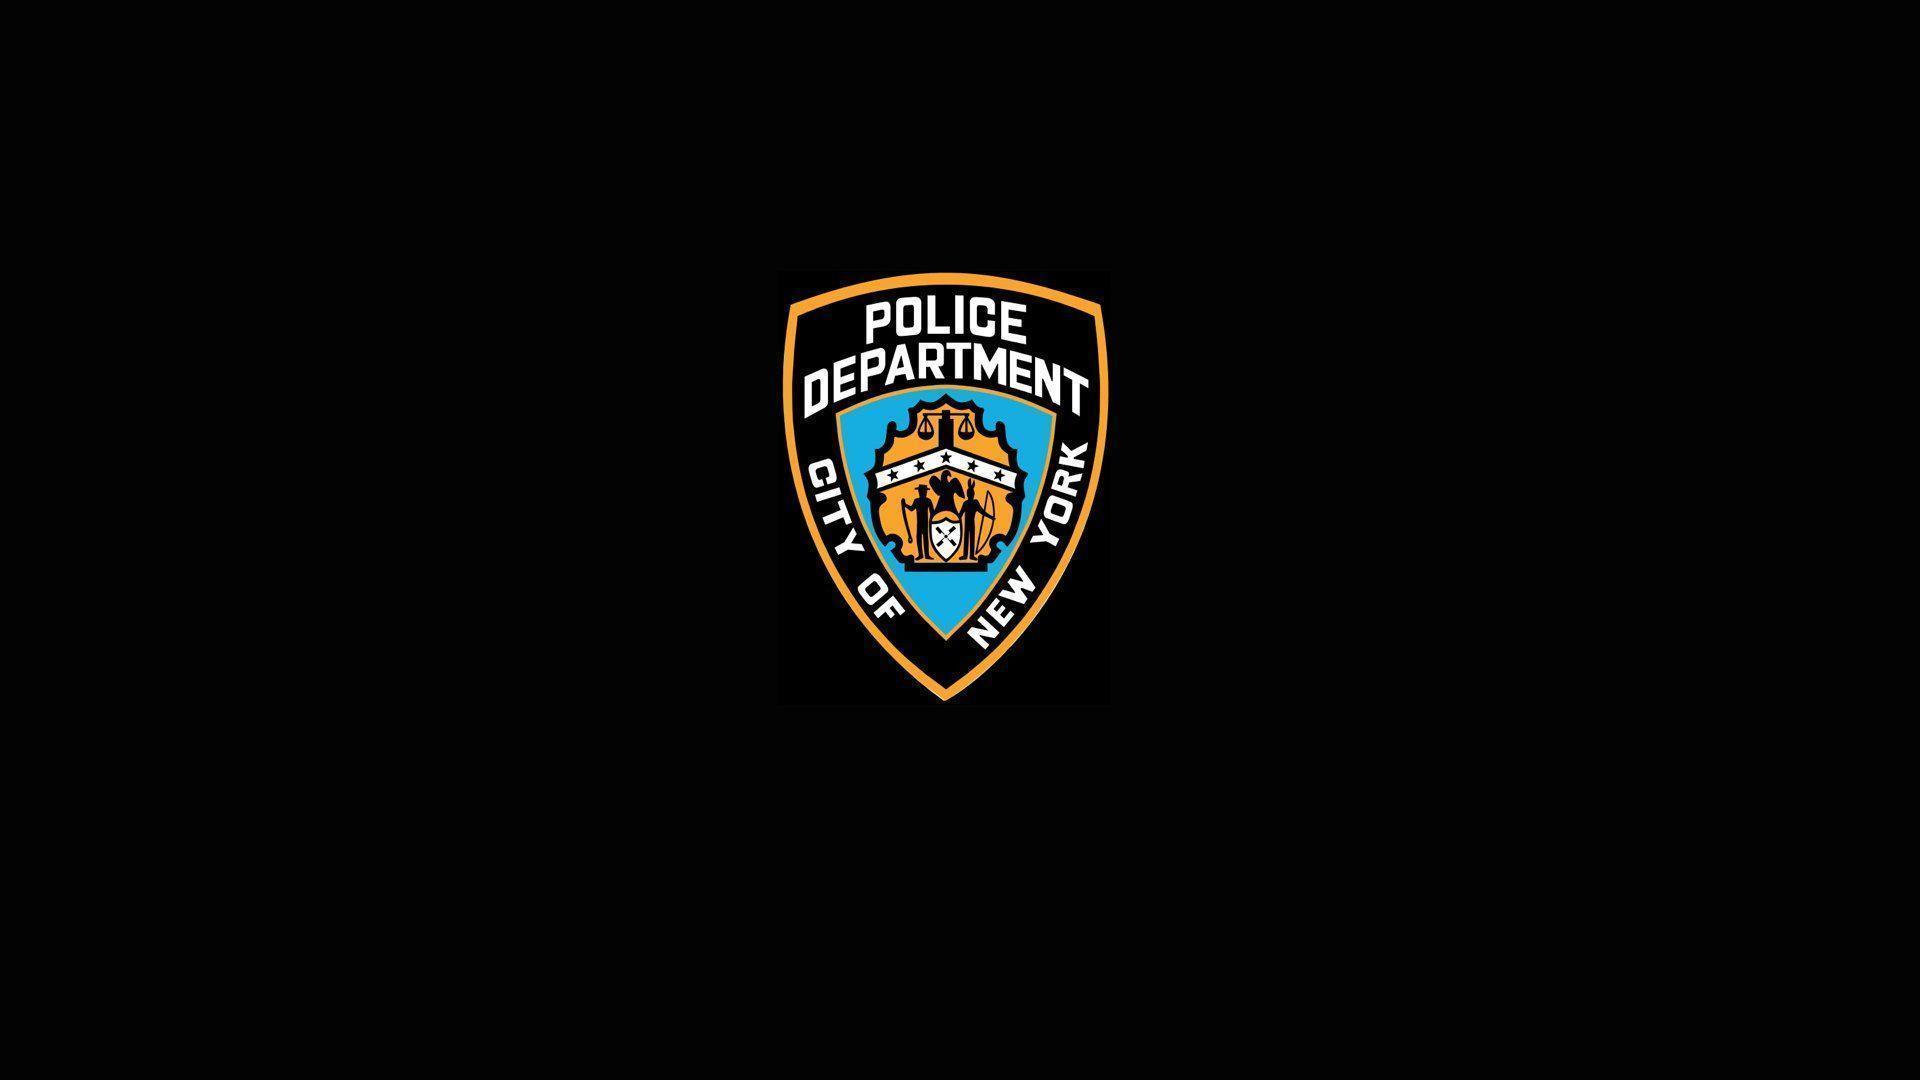 NYPD Wallpapers - Wallpaper Cave